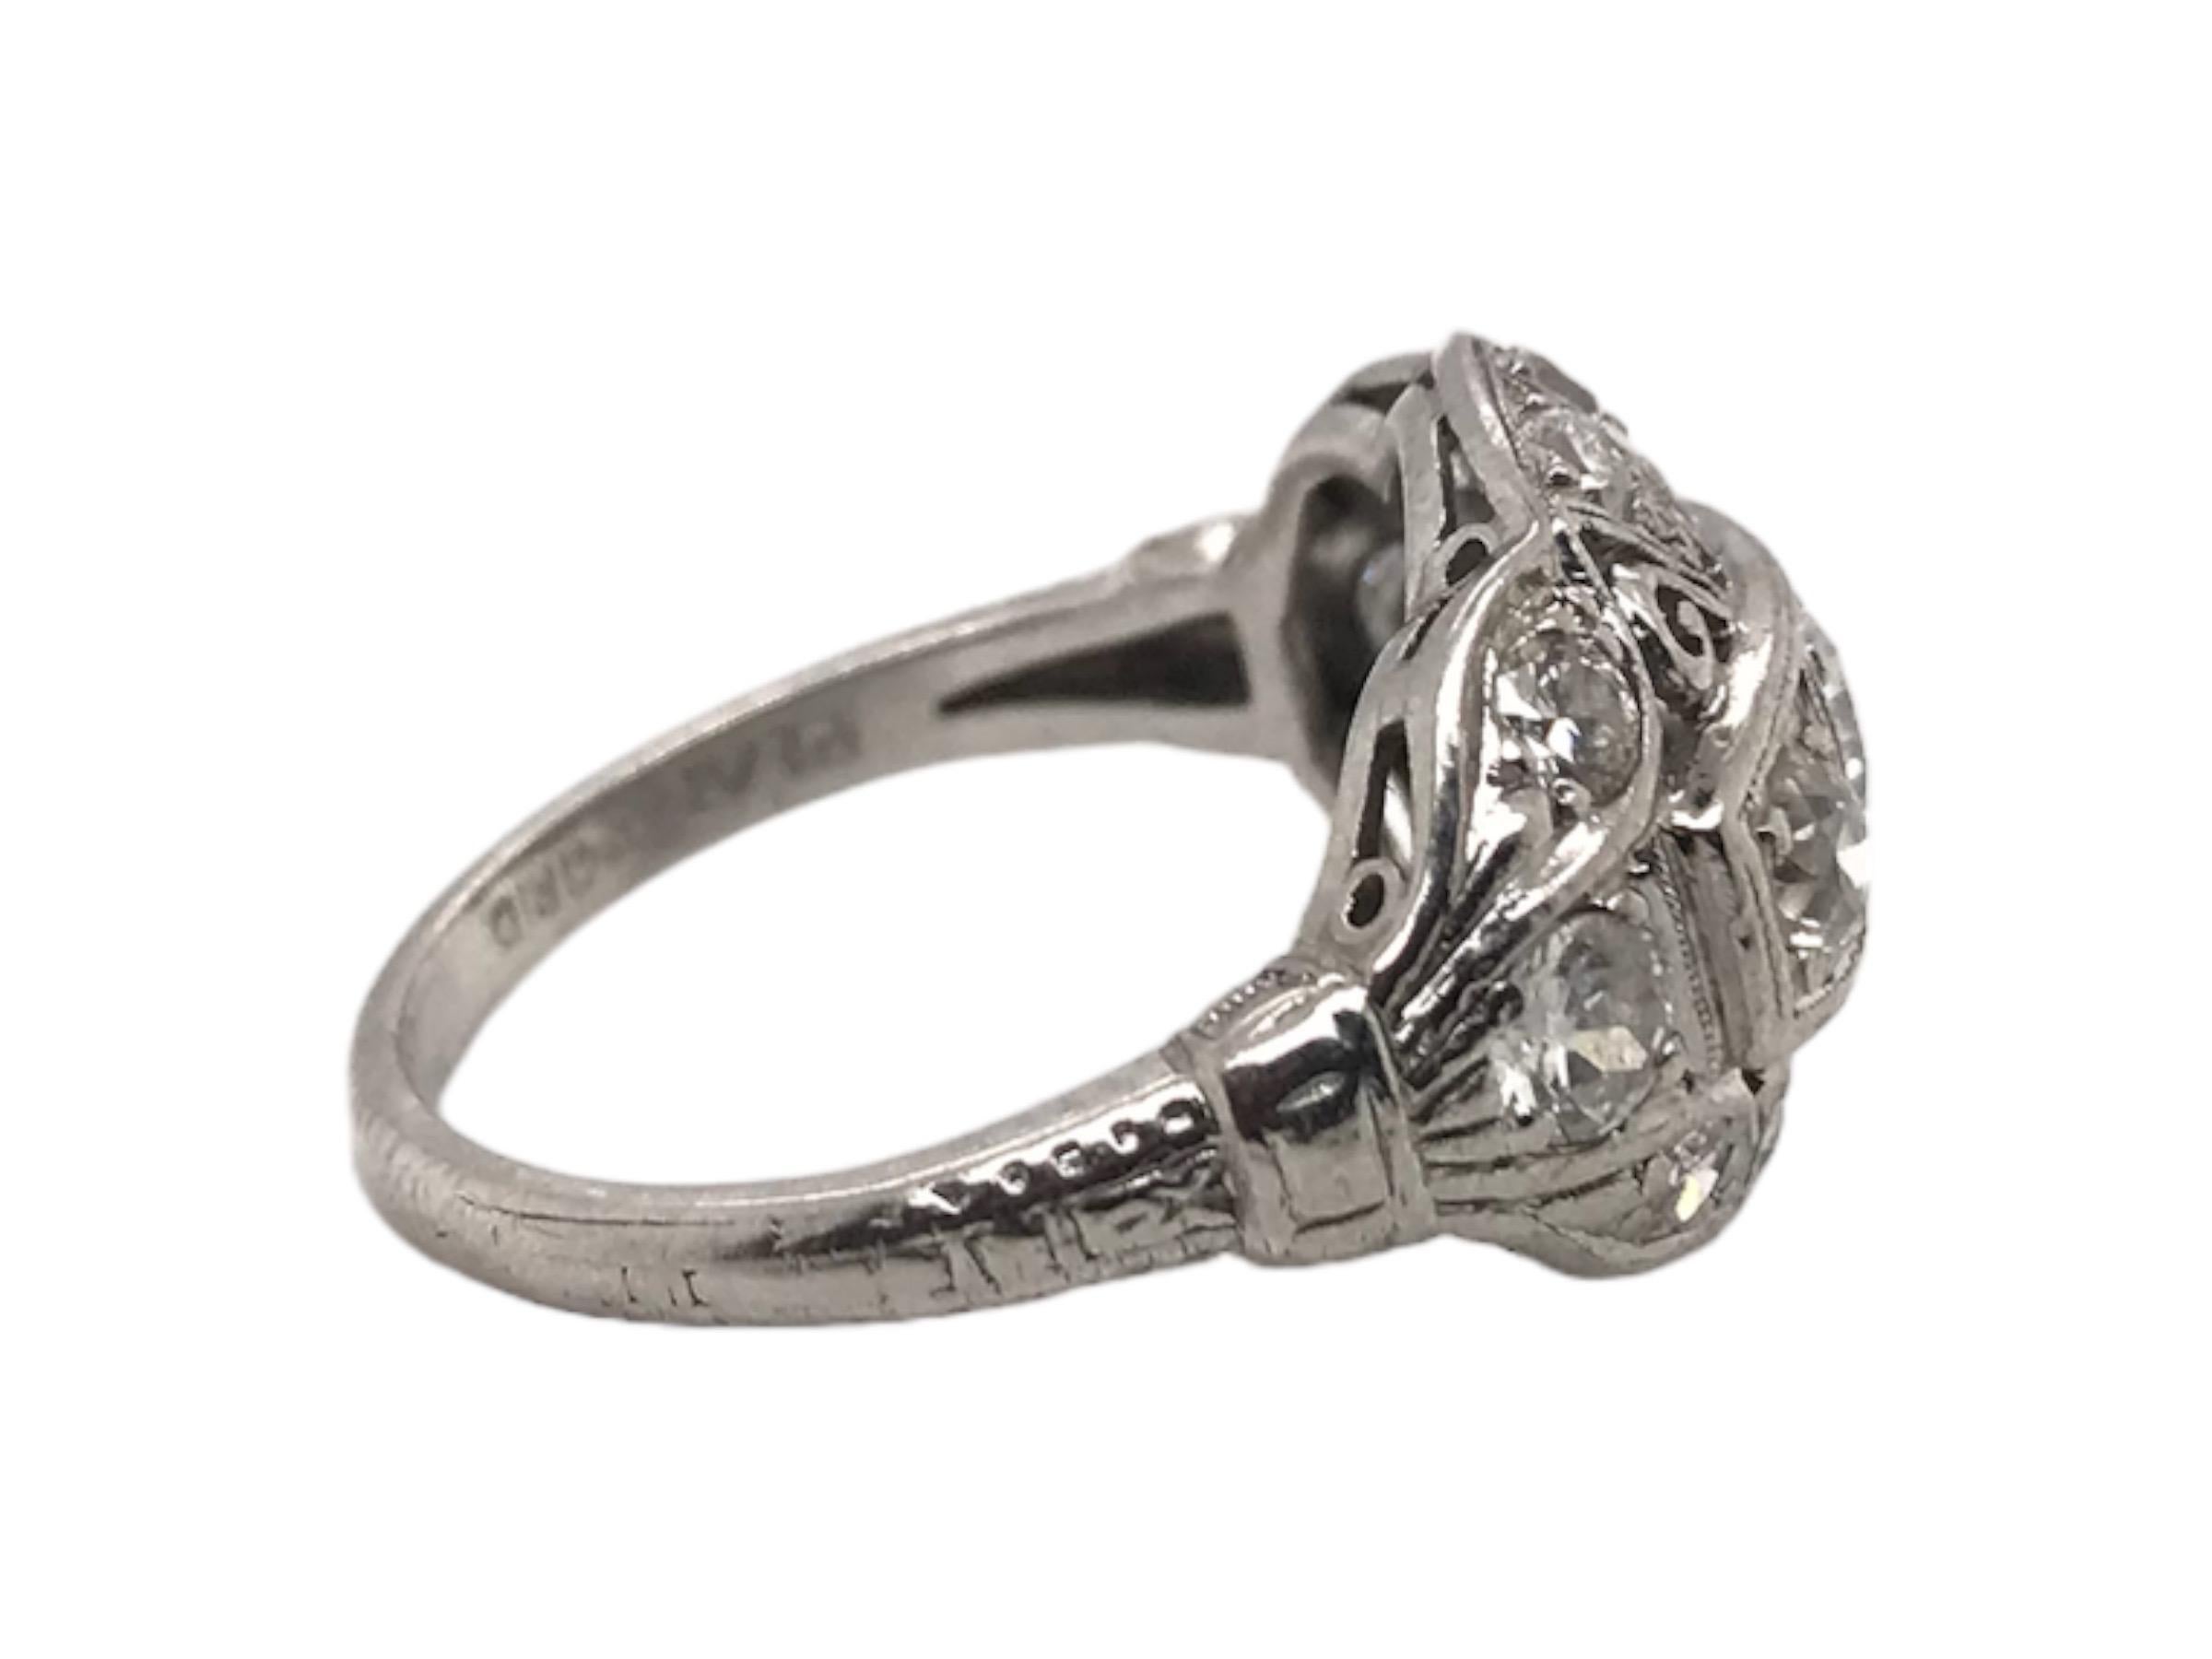 Edwardian Era Platinum 1.0CTW Diamond Cocktail Ring In Good Condition For Sale In Montgomery, AL